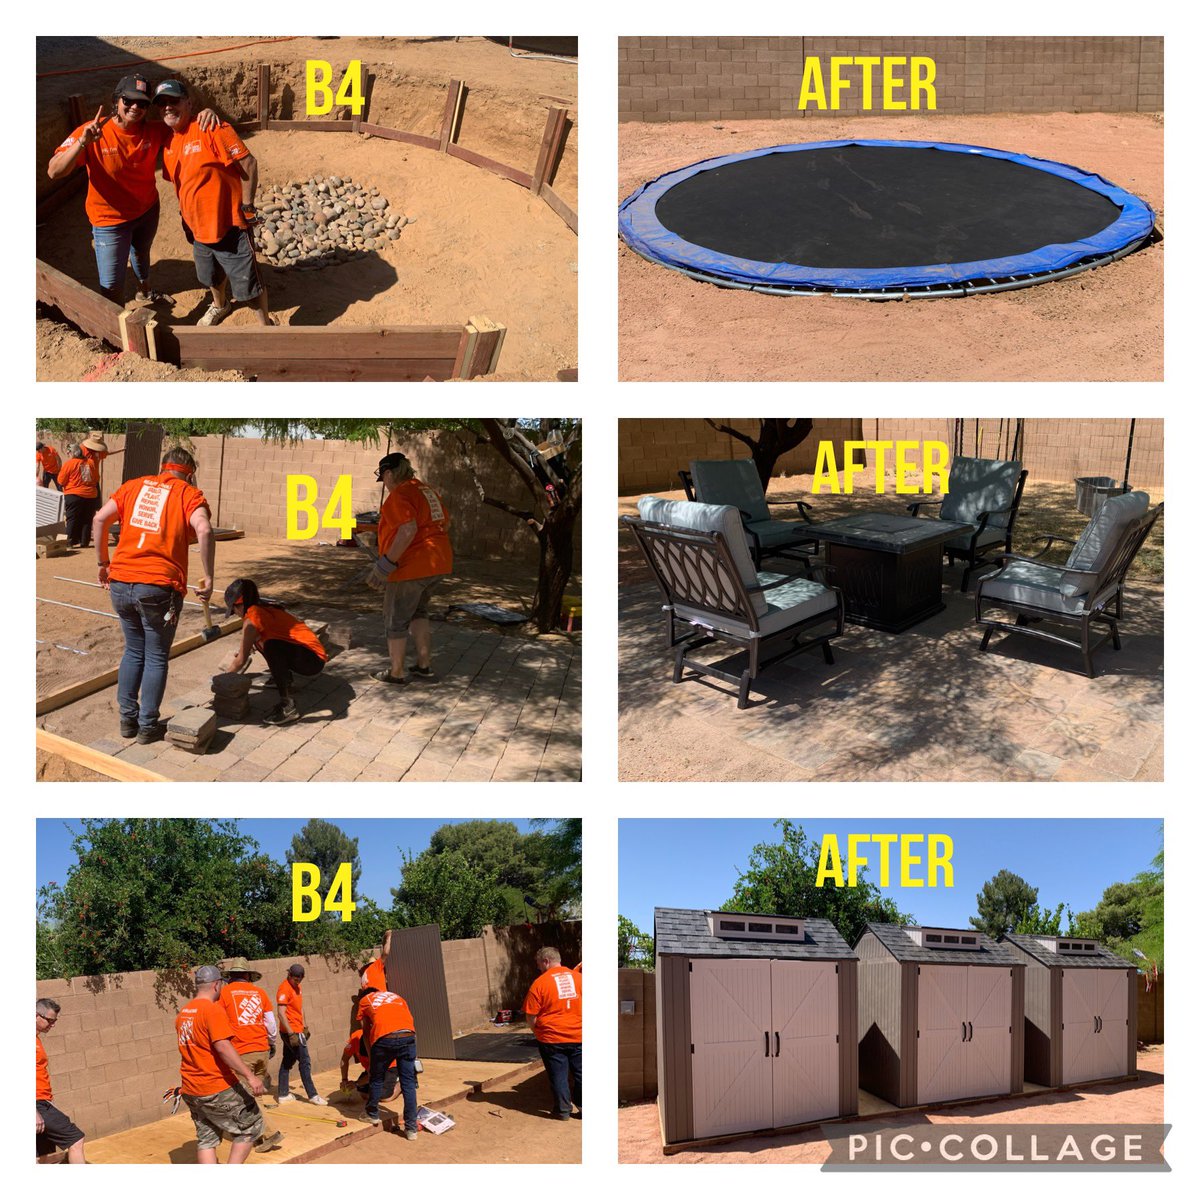 D130 & D66 came together delivering a beautiful backyard renewal for a foster family of 12. The happiness these kids showed was priceless. Thanks to all that volunteered and community captains Crystal and George @TeamDepot_Ryan @BlankenshipSB @DJJKsanchez @CrystalP6948 @GPsharkz